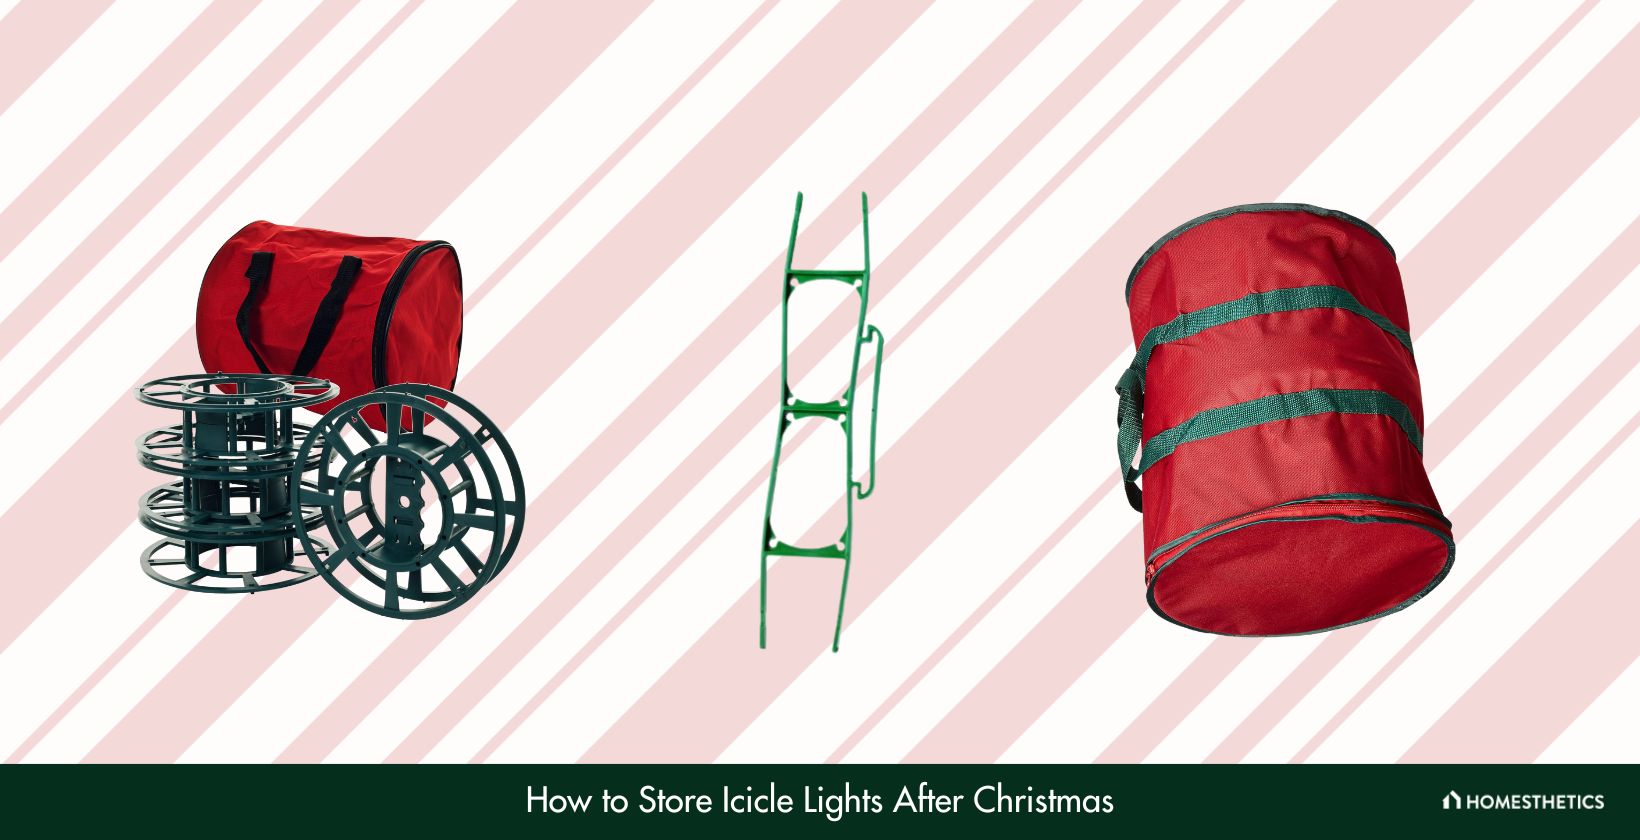 How to Store Icicle Lights After Christmas